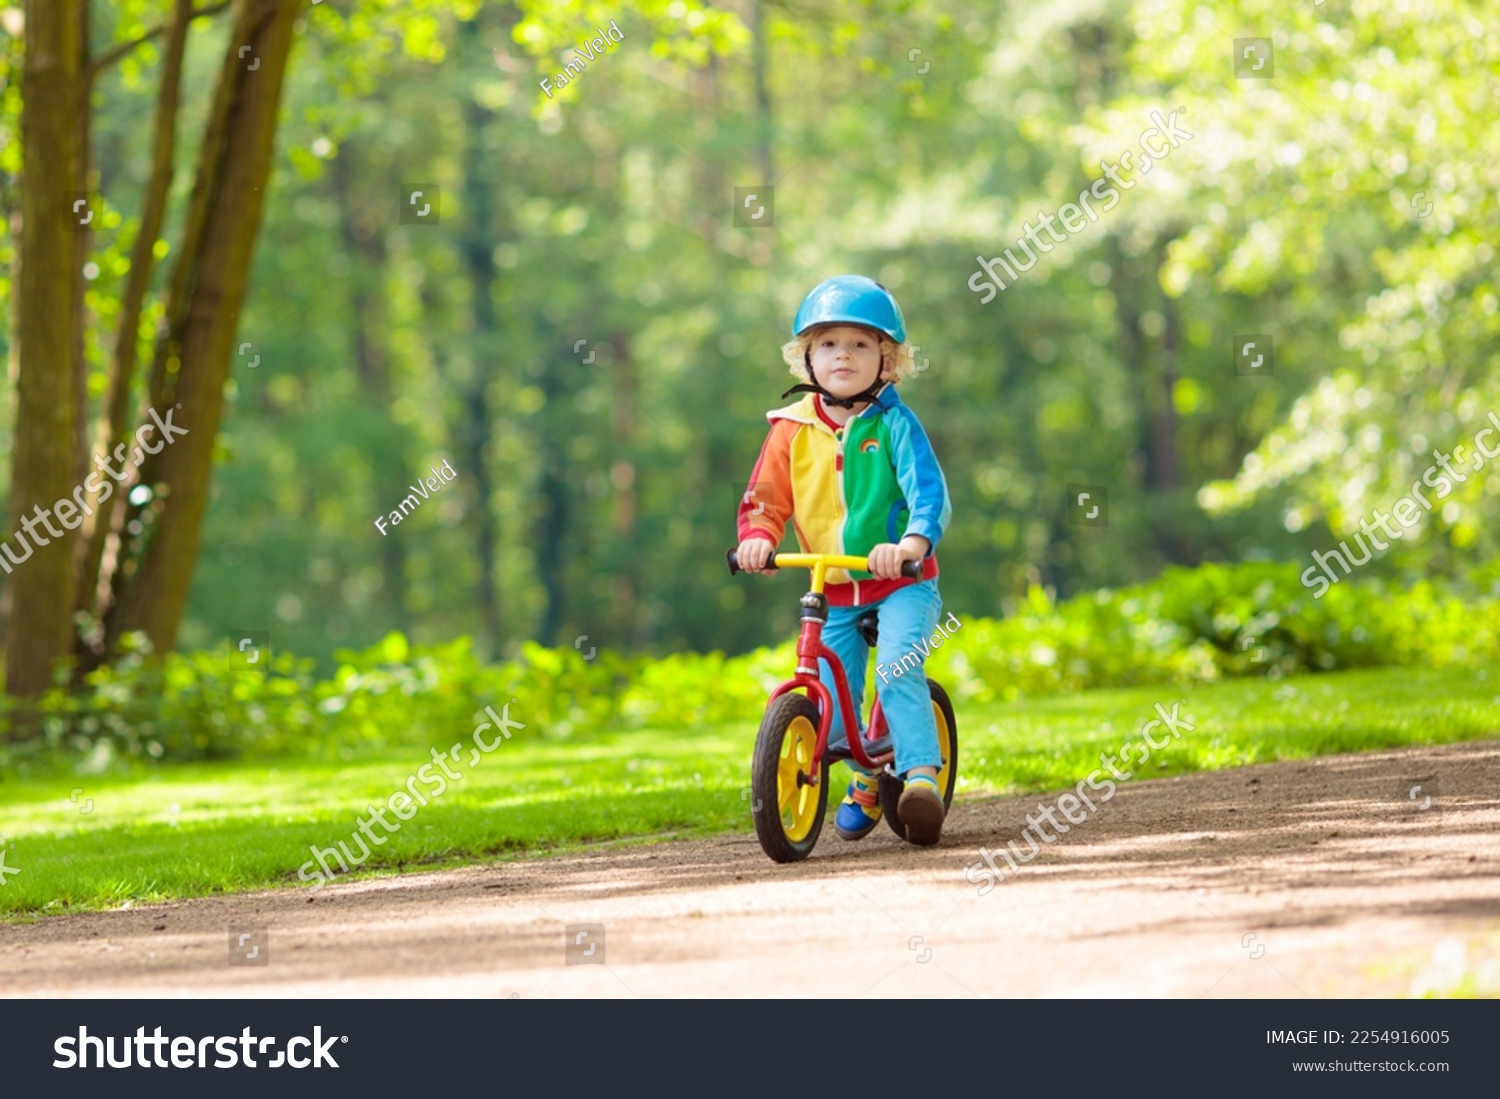 Child riding balance bike. Kids on bicycle in sunny park. Little boy enjoying to ride glider bike on warm summer day. Preschooler learning to balance on run bicycle in safe helmet. Sport for kids. #2254916005